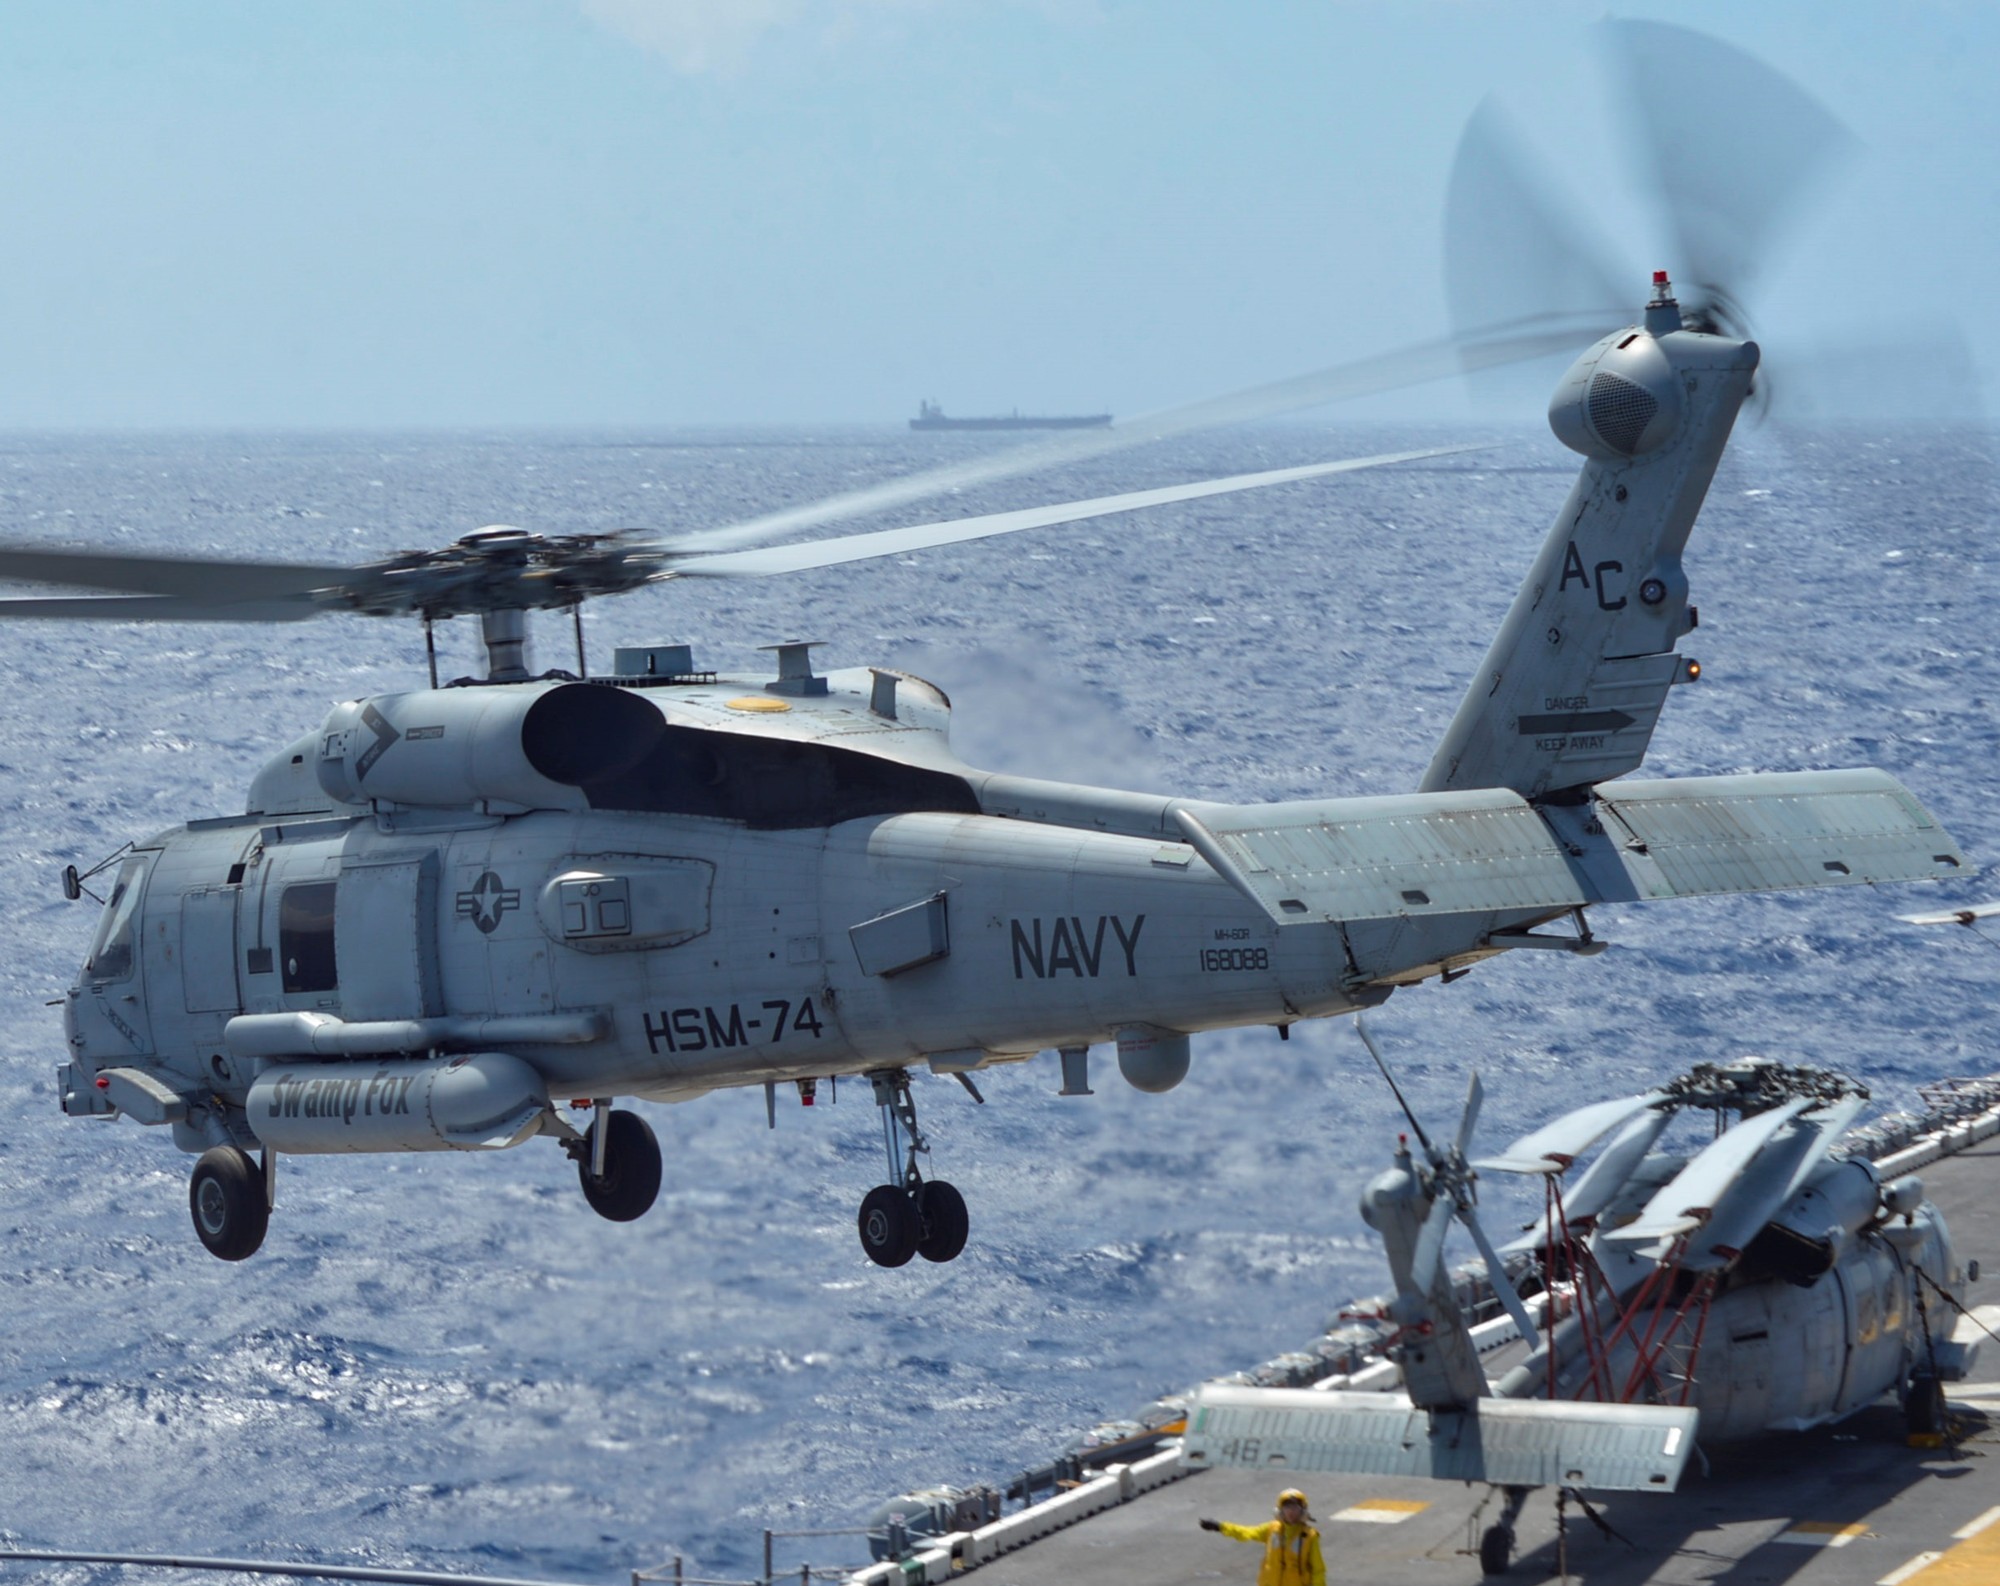 hsm-74 swamp foxes helicopter maritime strike squadron mh-60r seahawk lhd-7 uss iwo jima 03